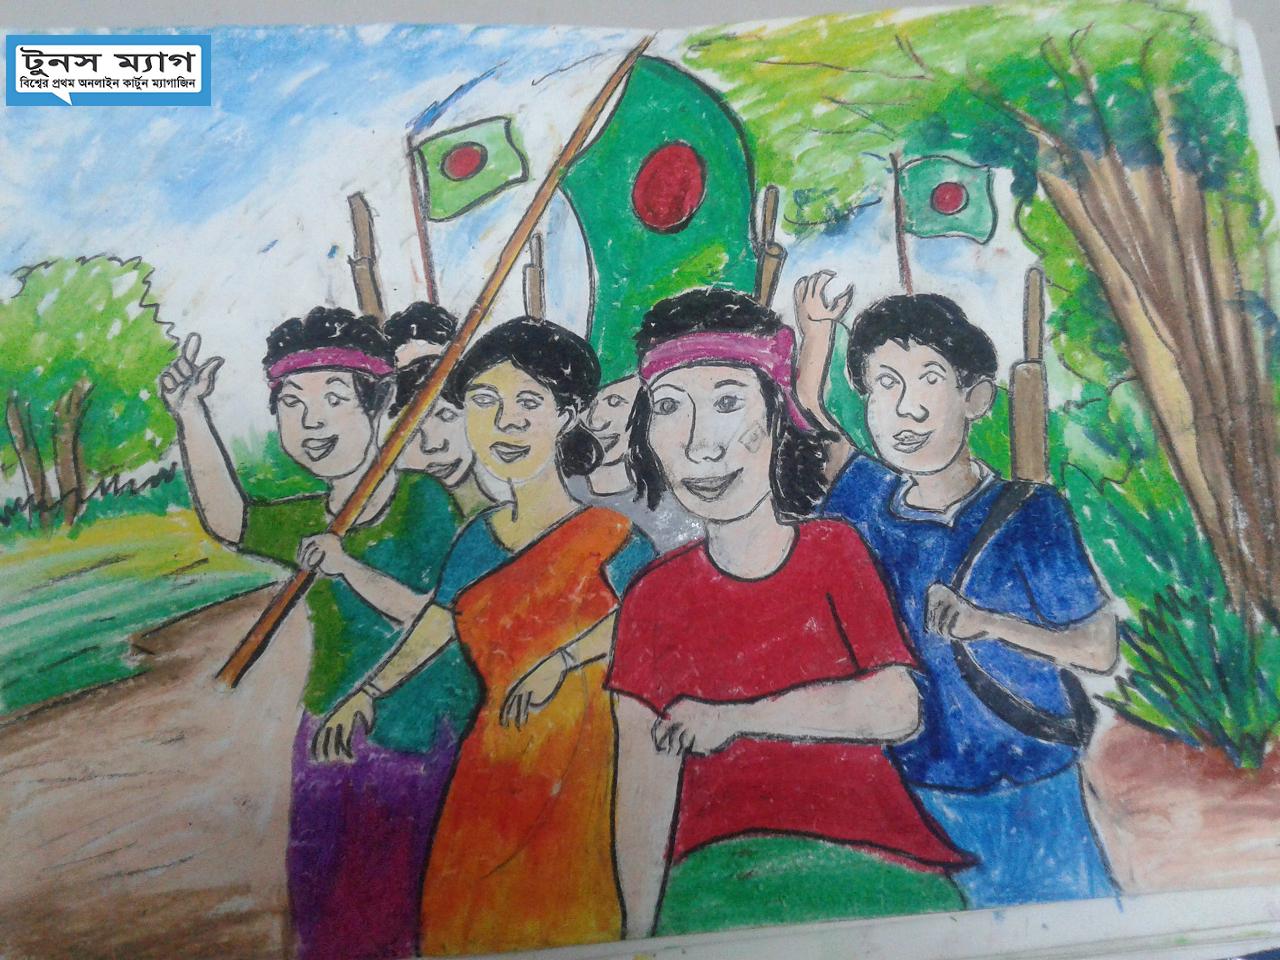 Victory Day Drawing - Victory Day Image Download - Victory Day Drawing - Victory Day Scene Drawing - bijoy dibosh - NeotericIt.com